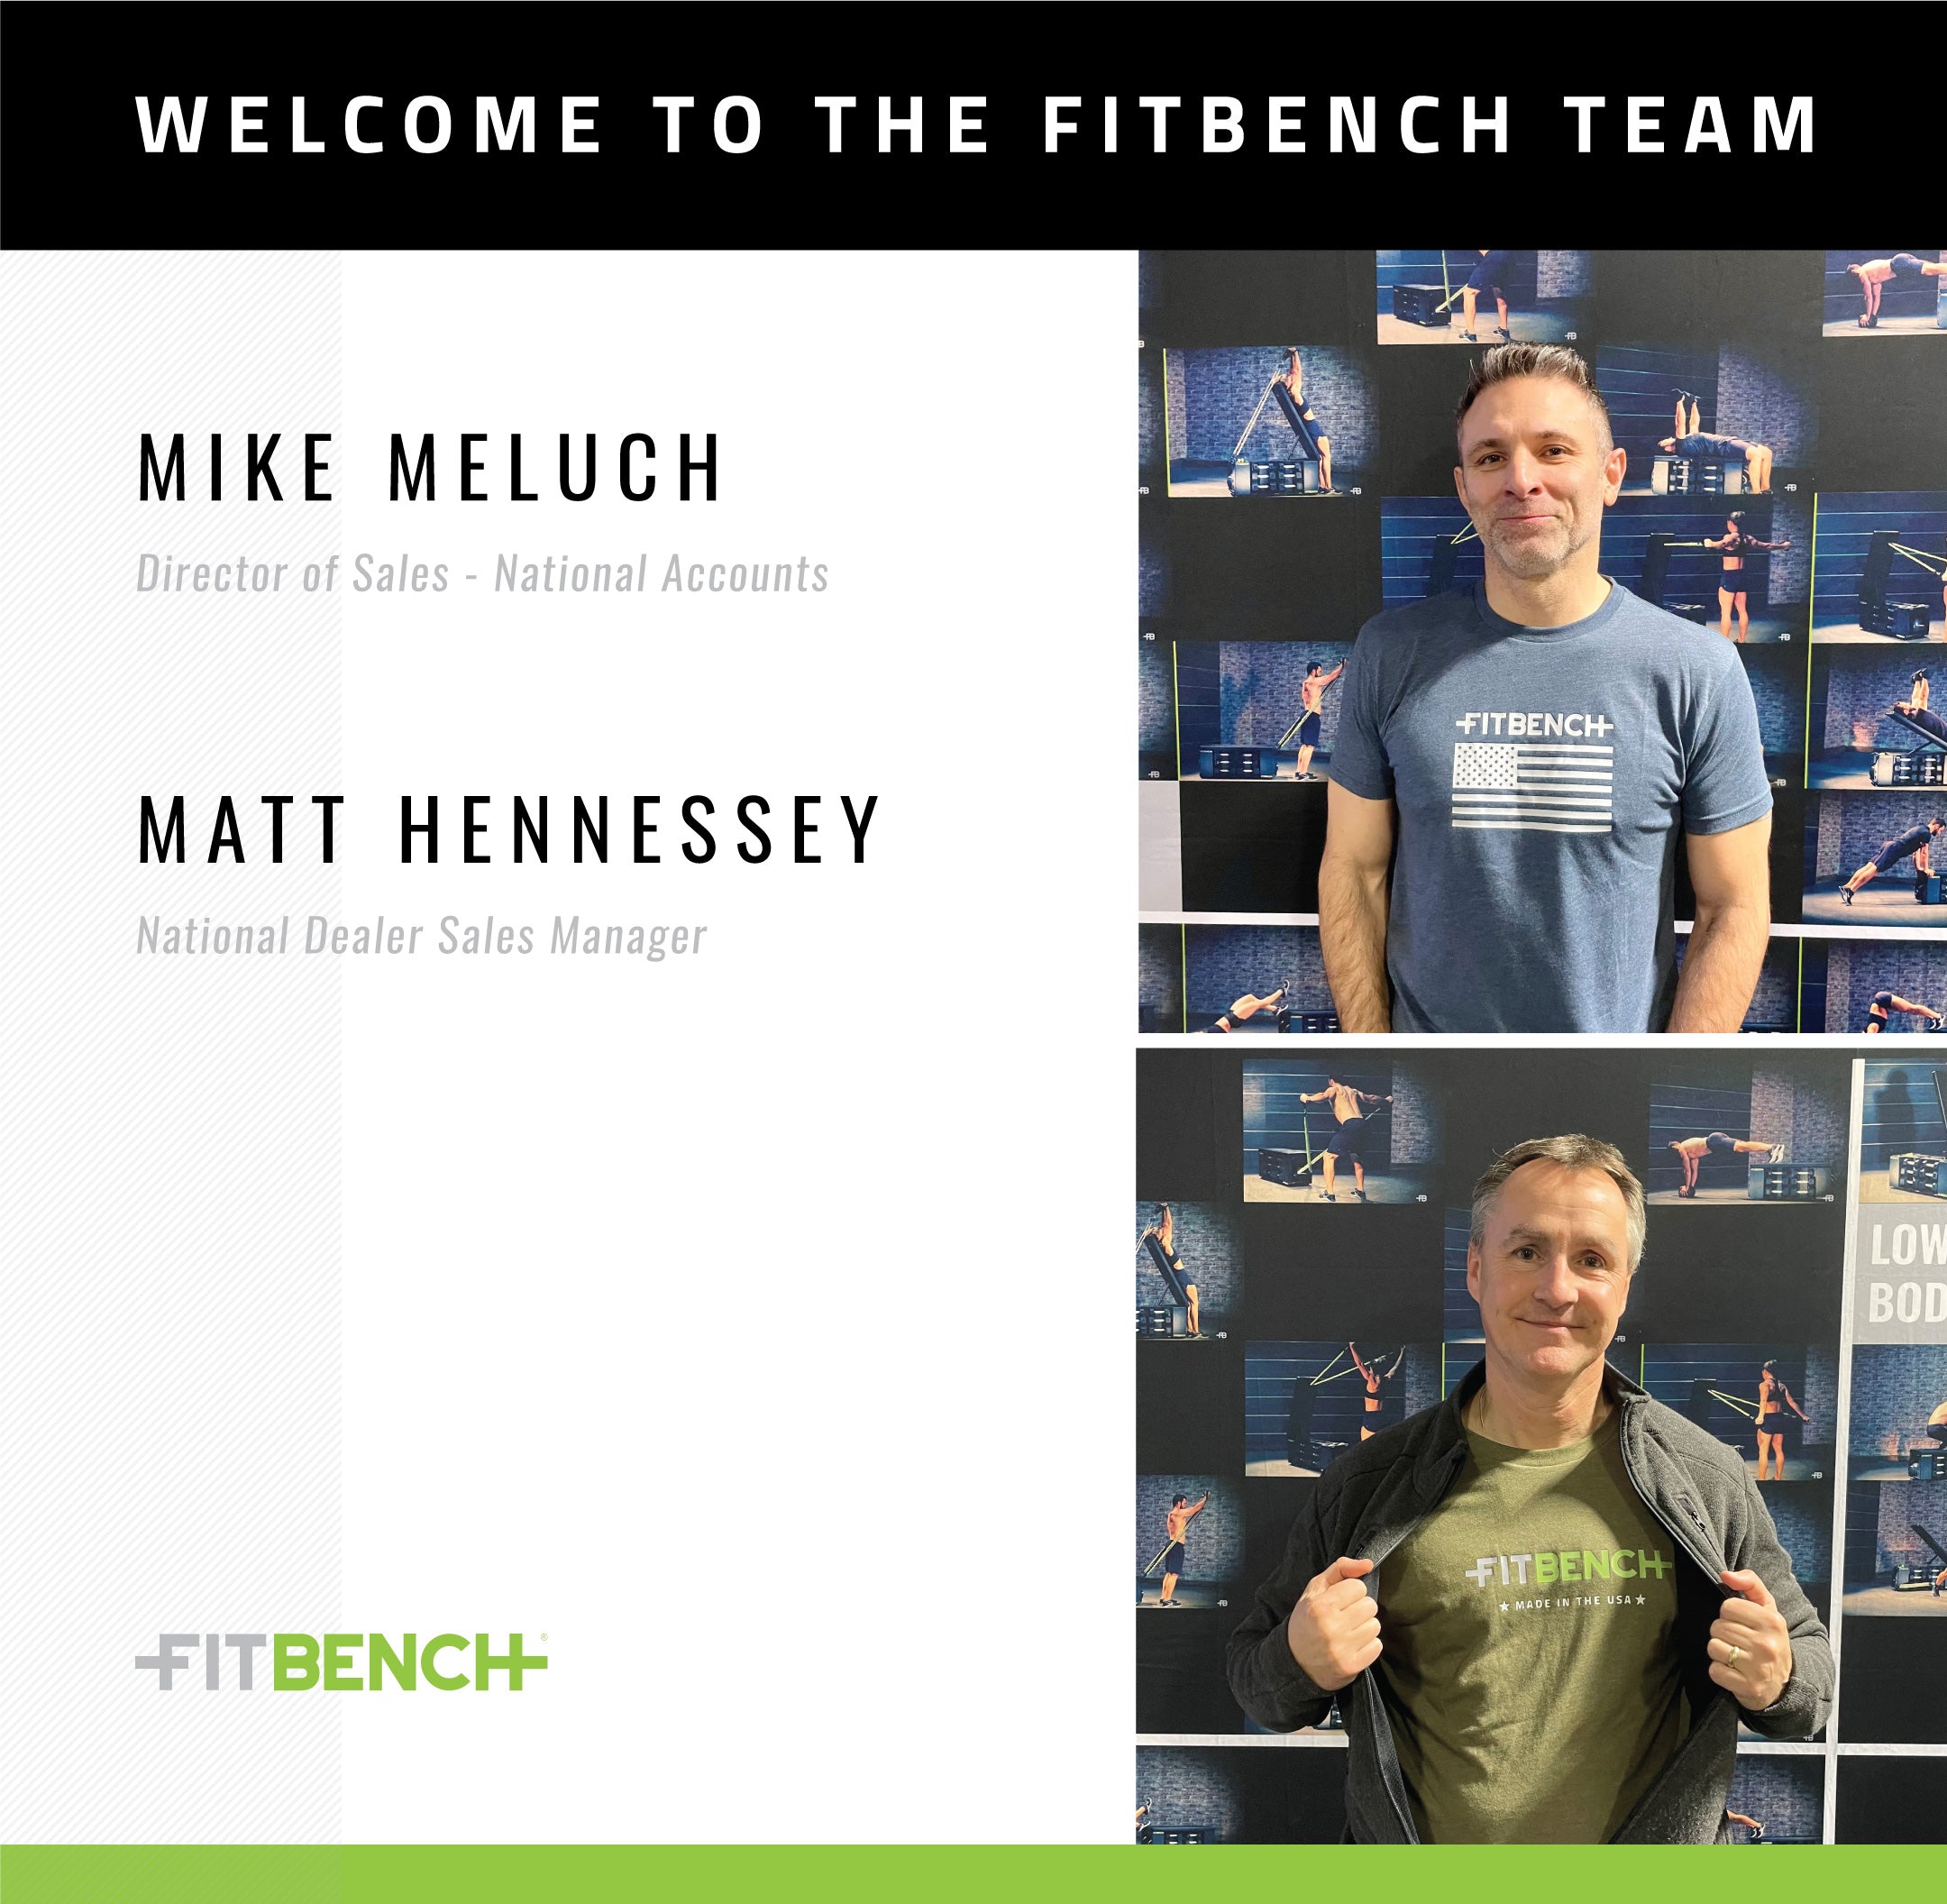 FITBENCH® Expands Sales Team with Two Industry Leaders